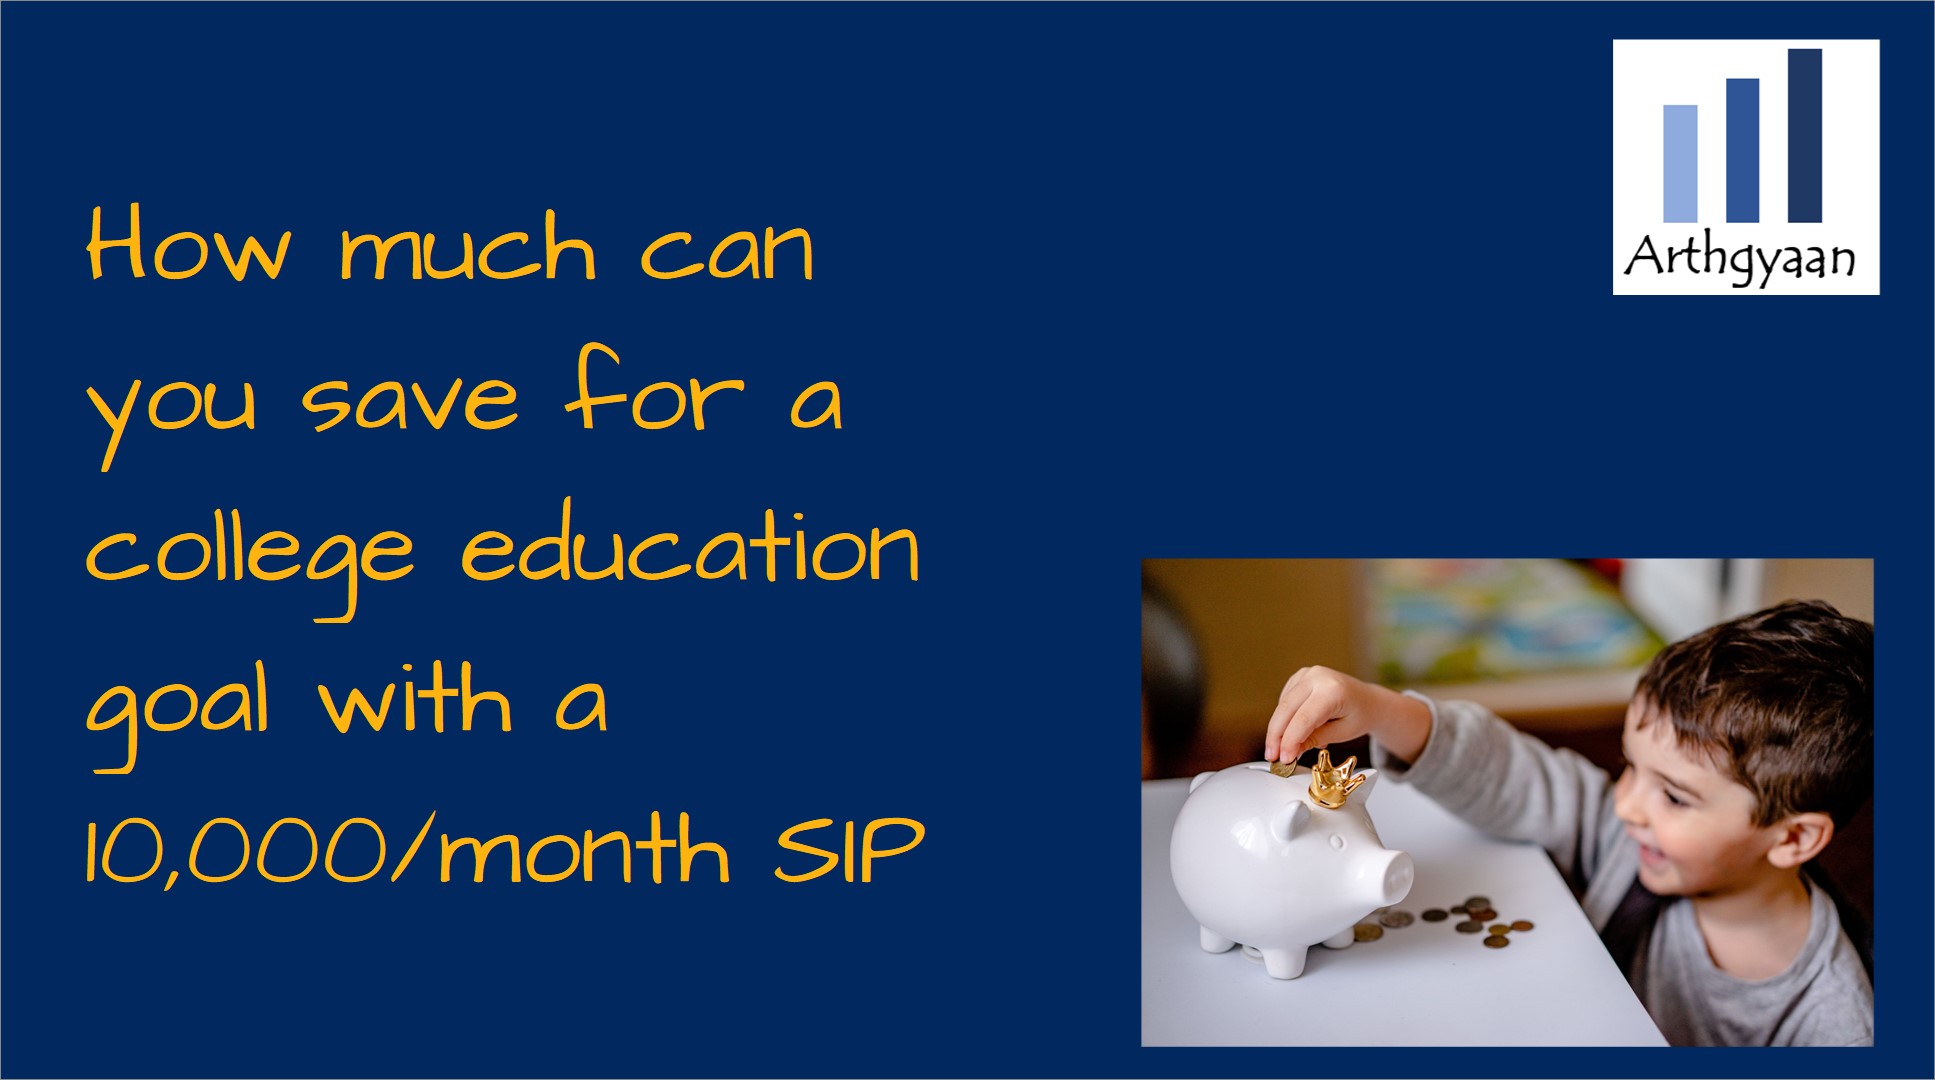 How much can you save for a college education goal with a 10000/month SIP